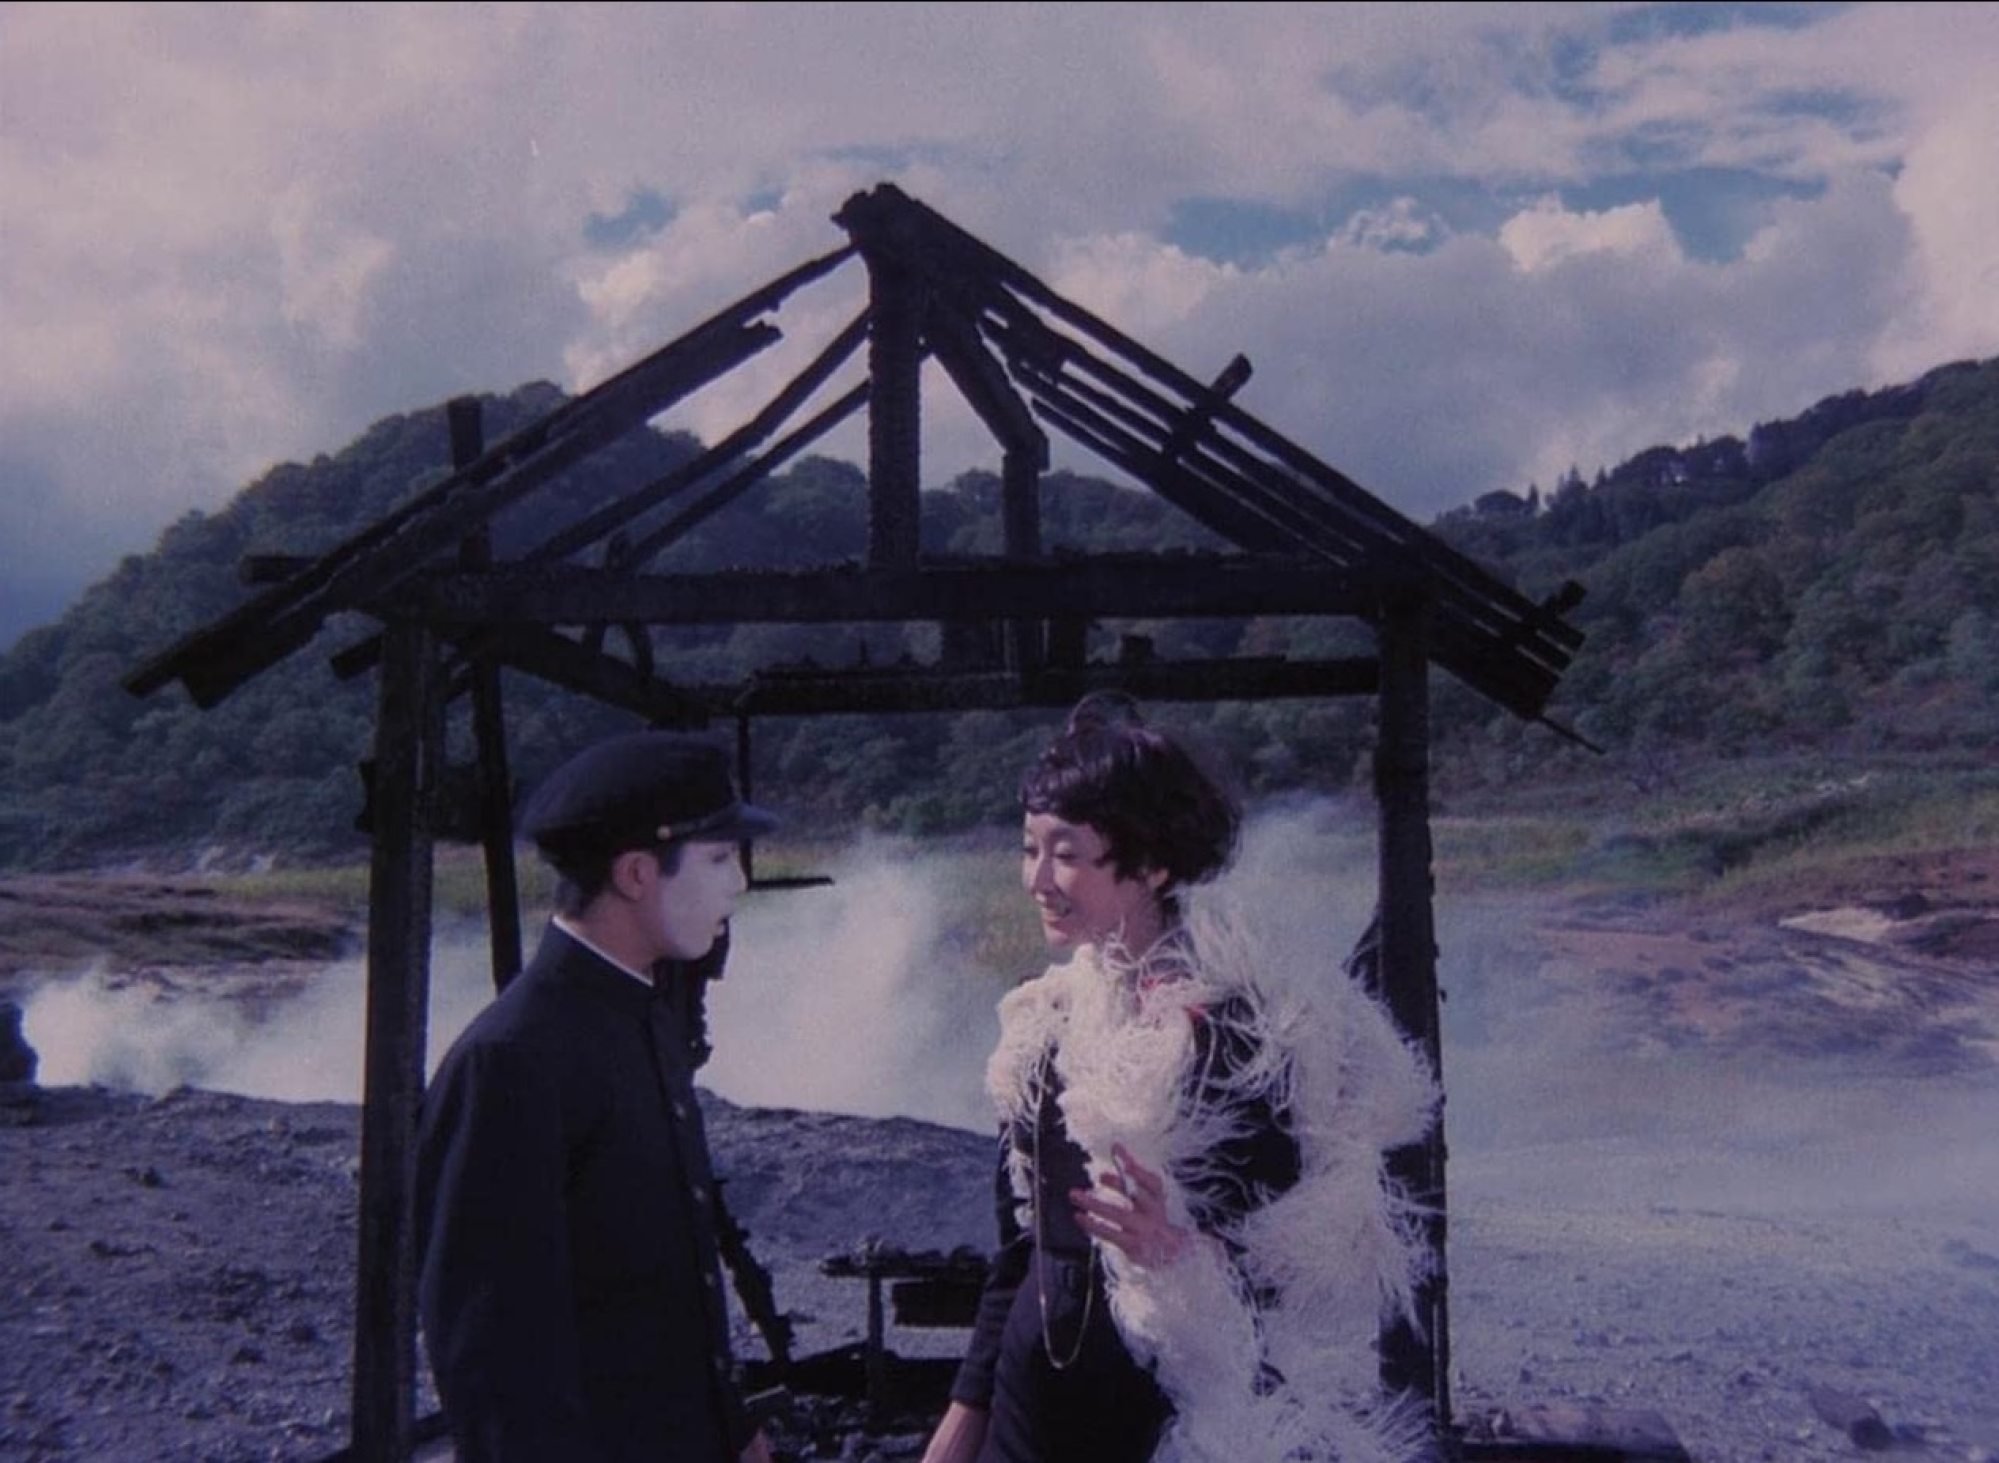 A scene from Shuji Terayama’s film “Pastoral: To Die in the Country” (1974).